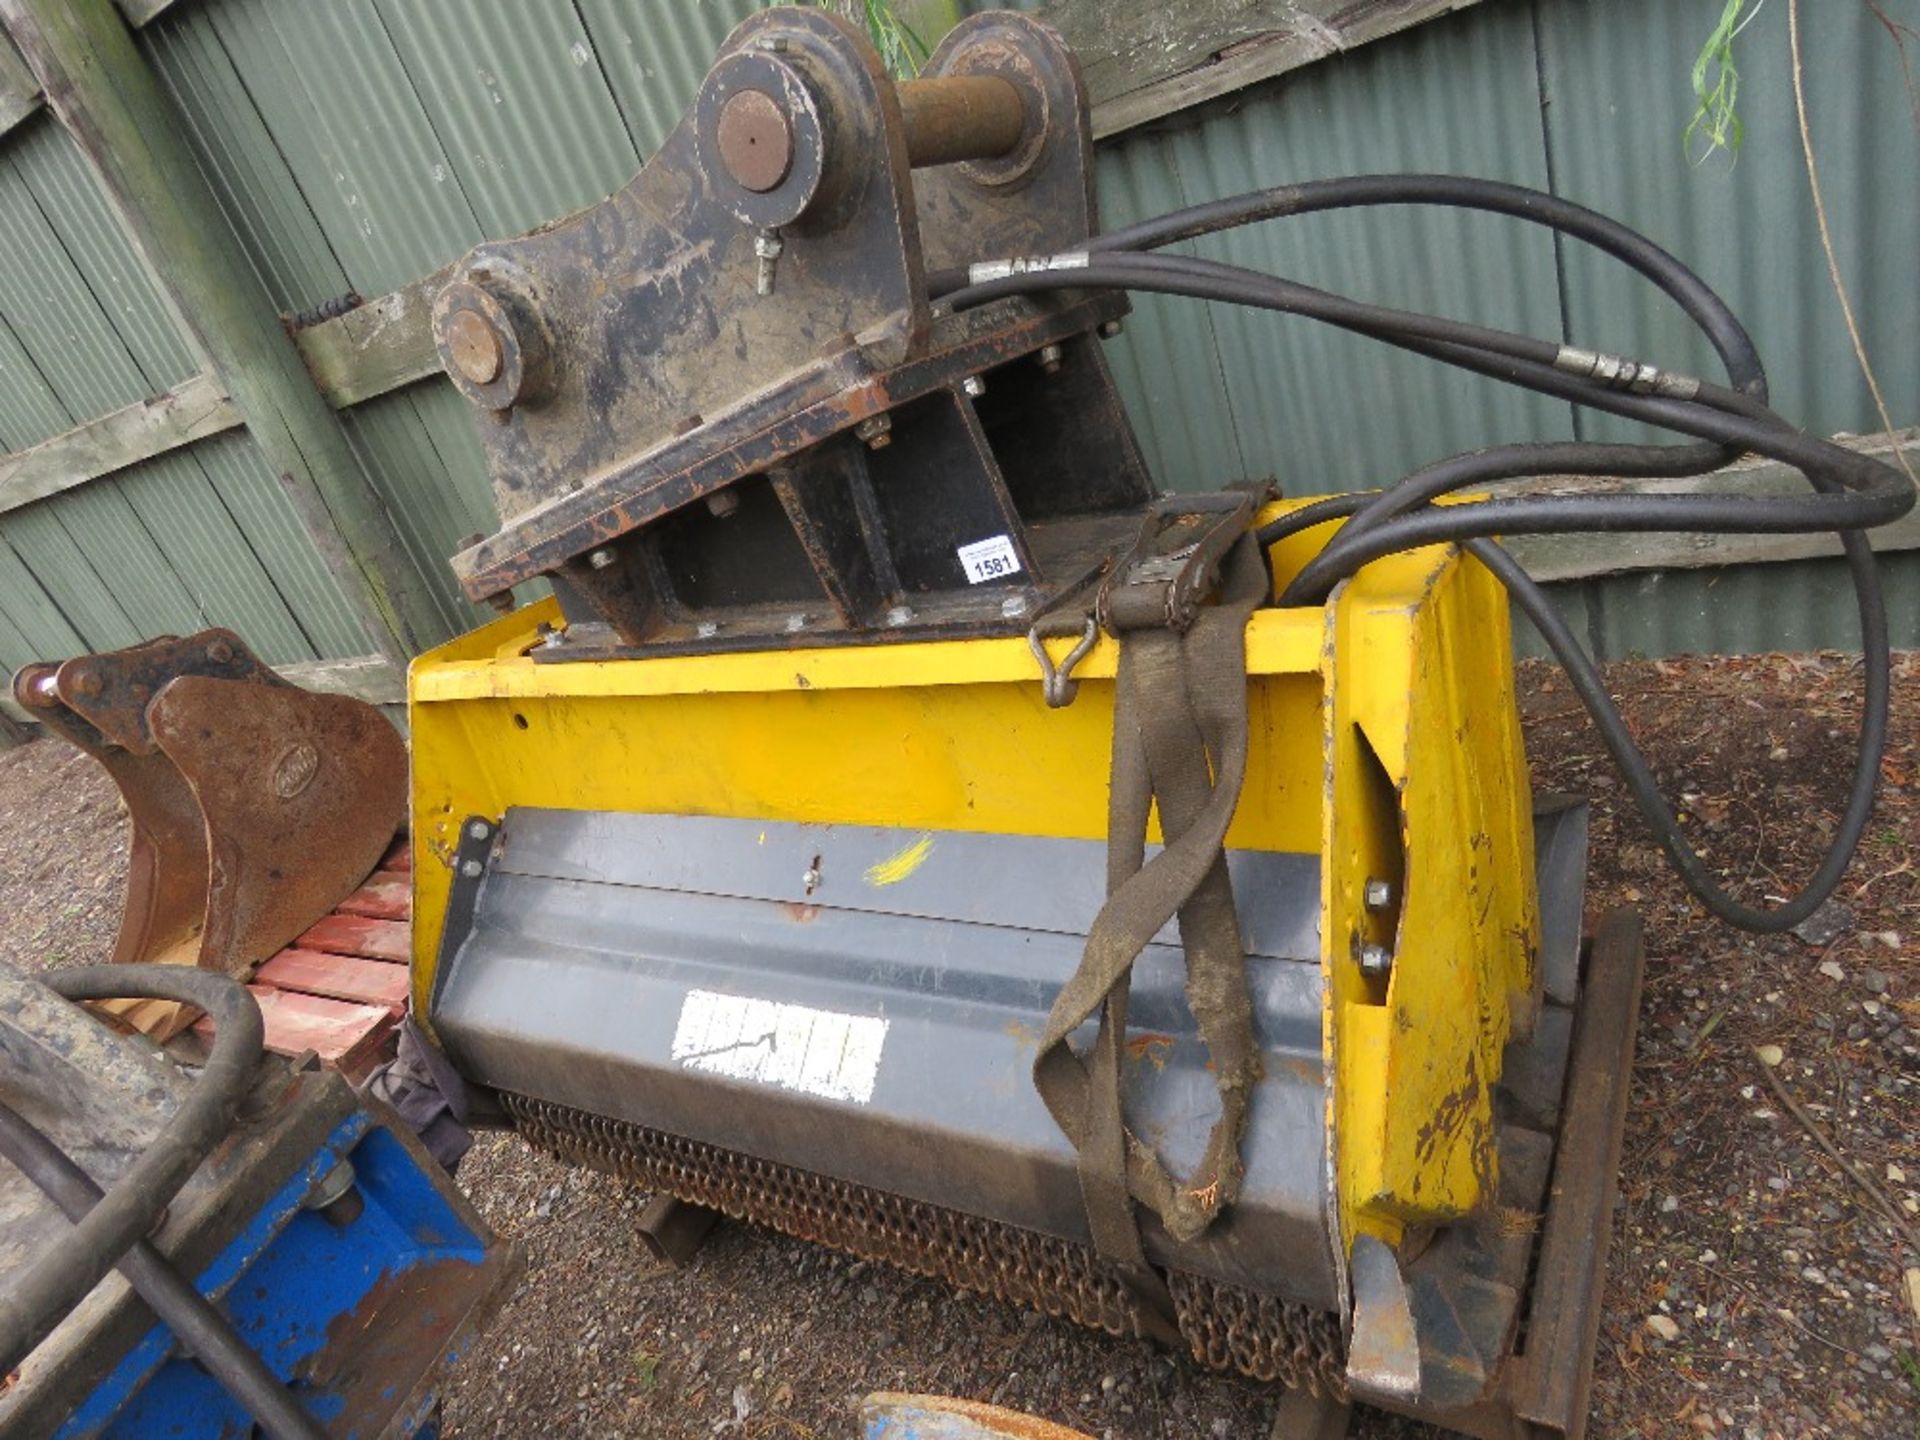 FEMAC EXCAVATOR MOUNTED HEAVY DUTY FLAIL HEAD ON 80MM PINS. UNTESTED, CONDITION UNKNOWN. - Image 2 of 8